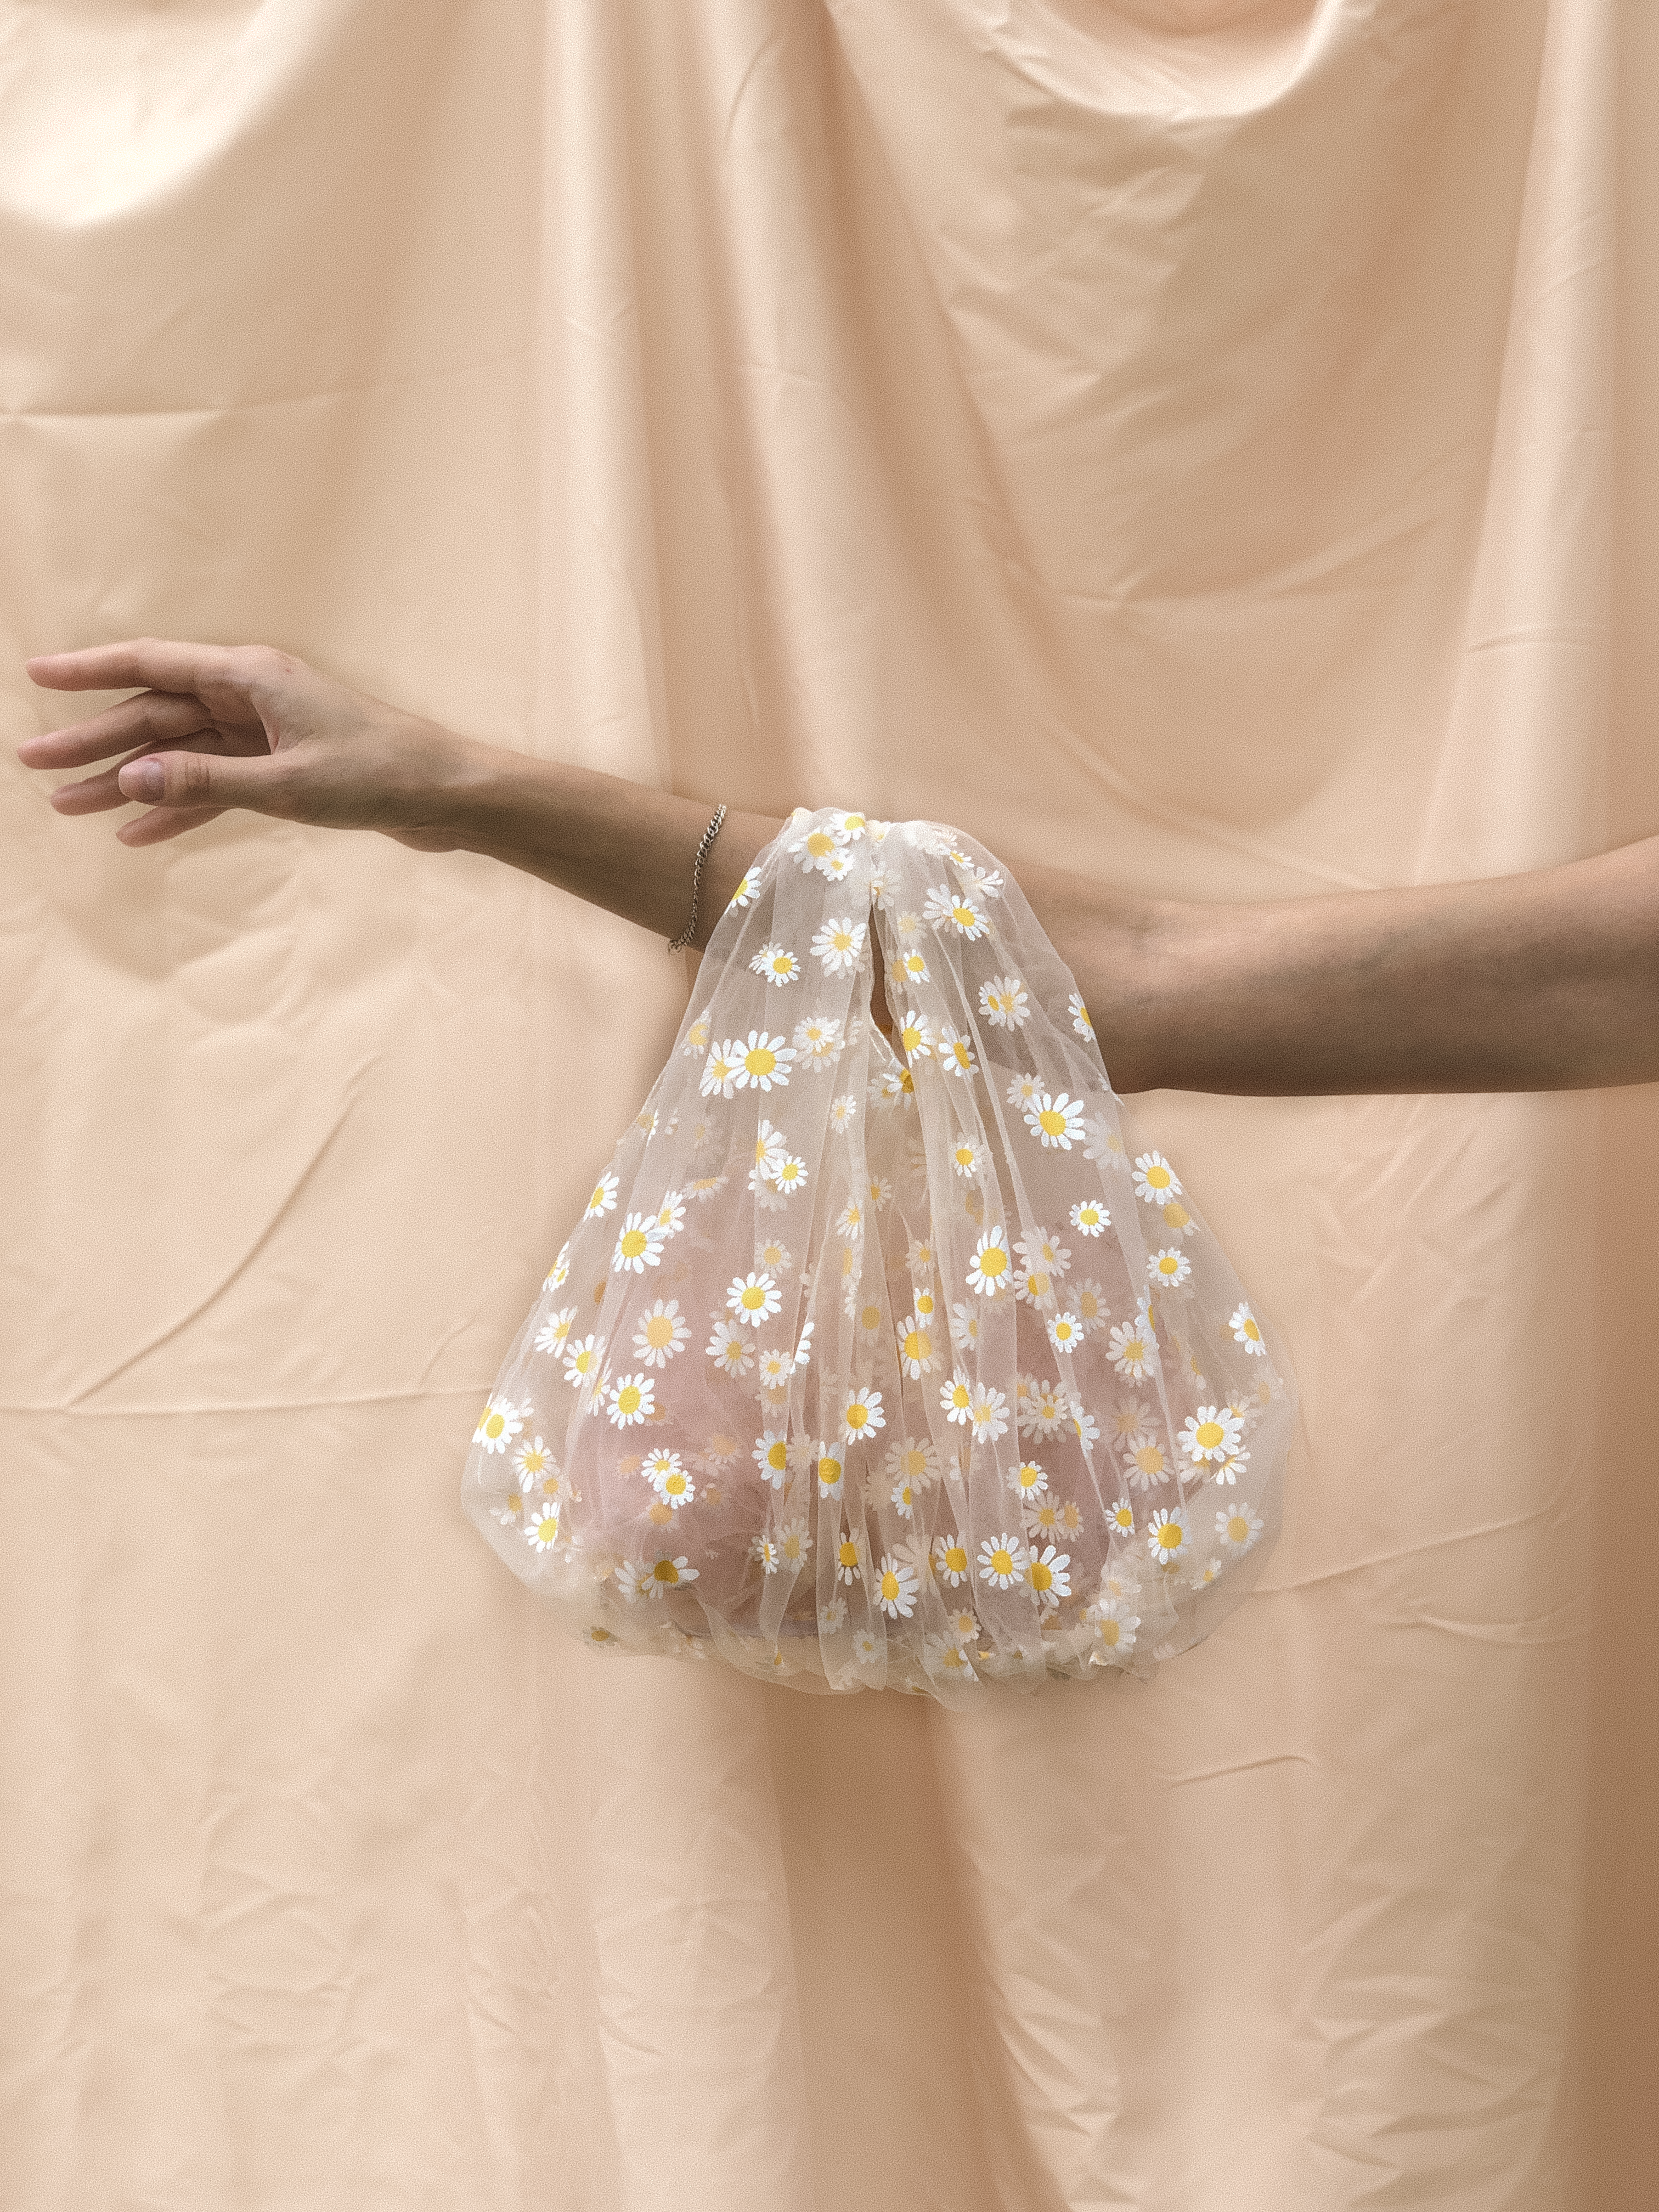 Daisy Mesh Bag in Creme by Veronique